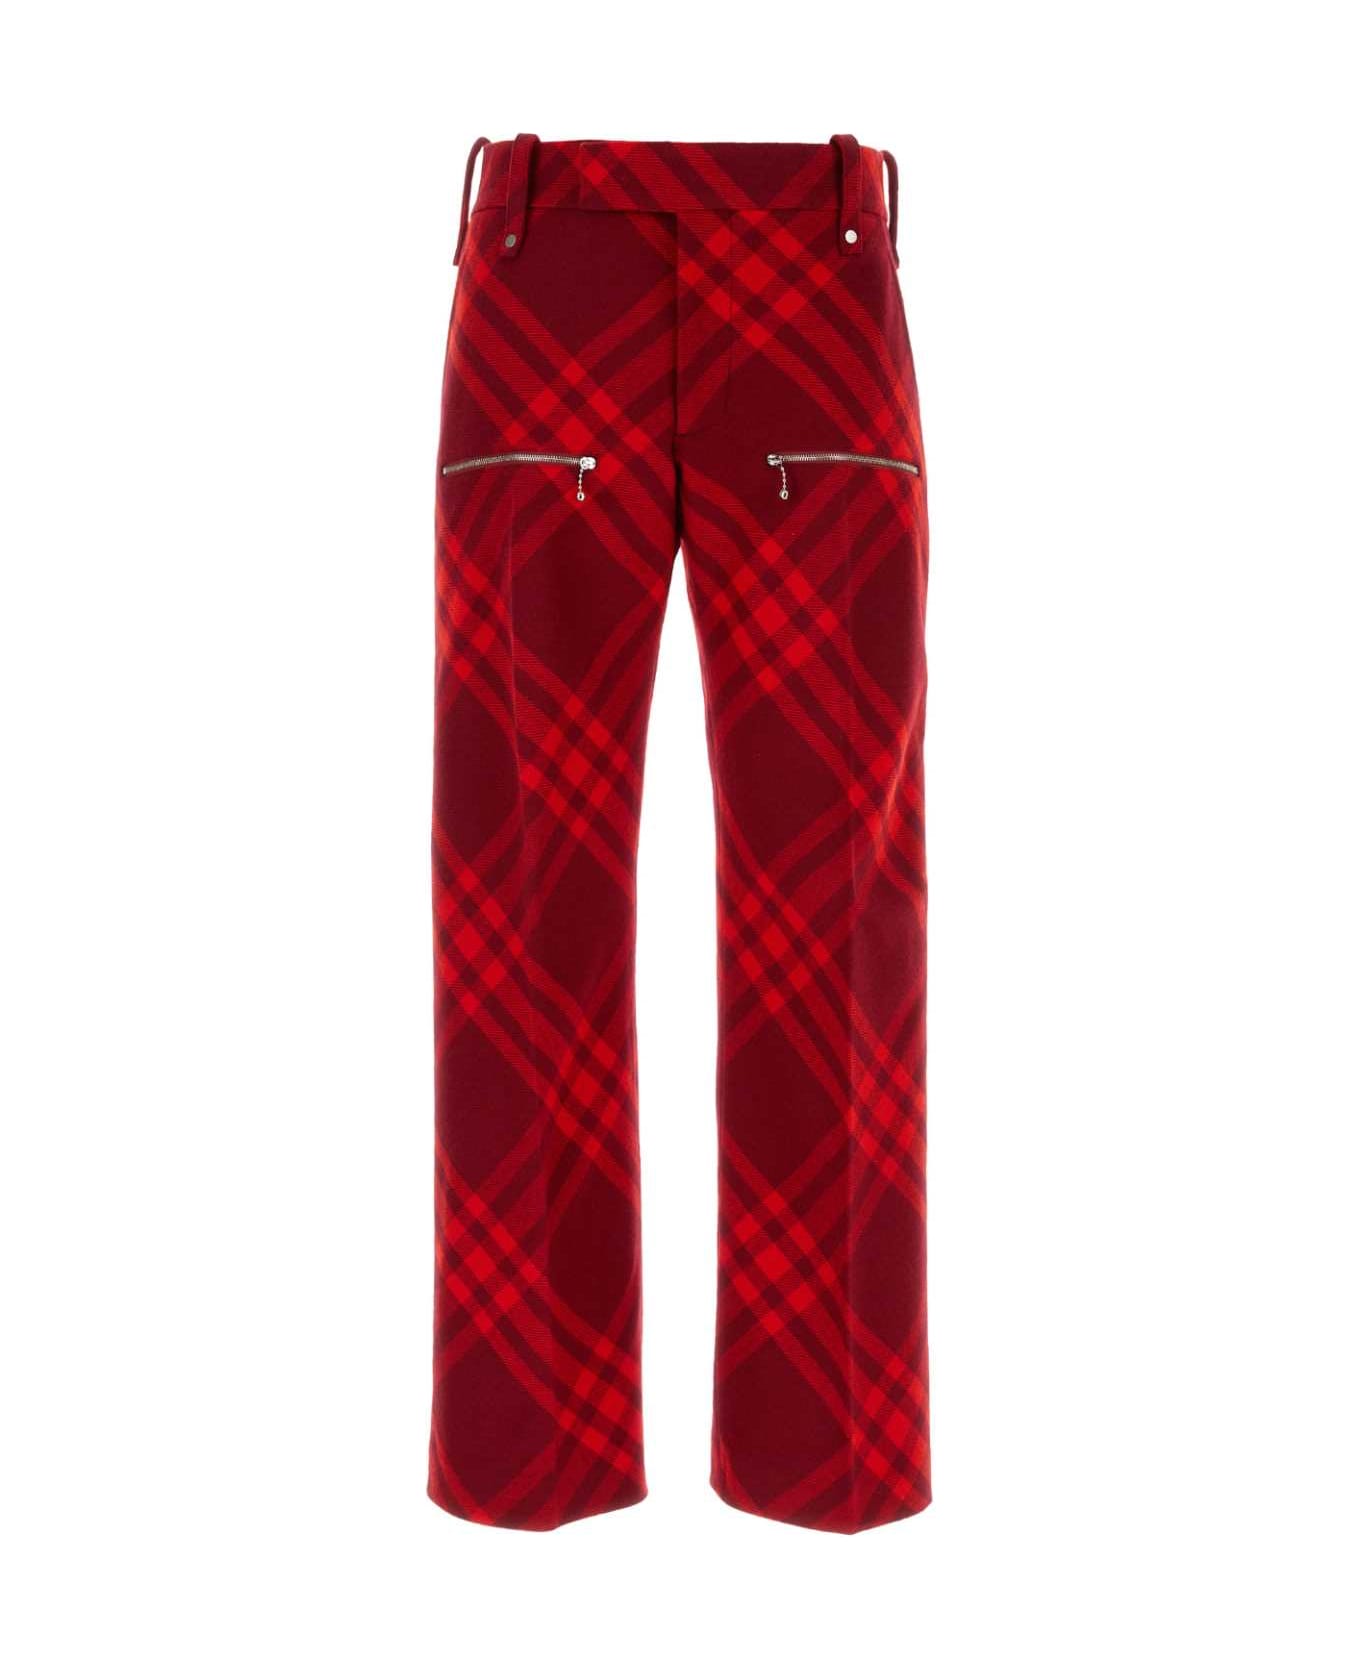 Burberry Embroidered Wool Pant - RIPPLE ボトムス